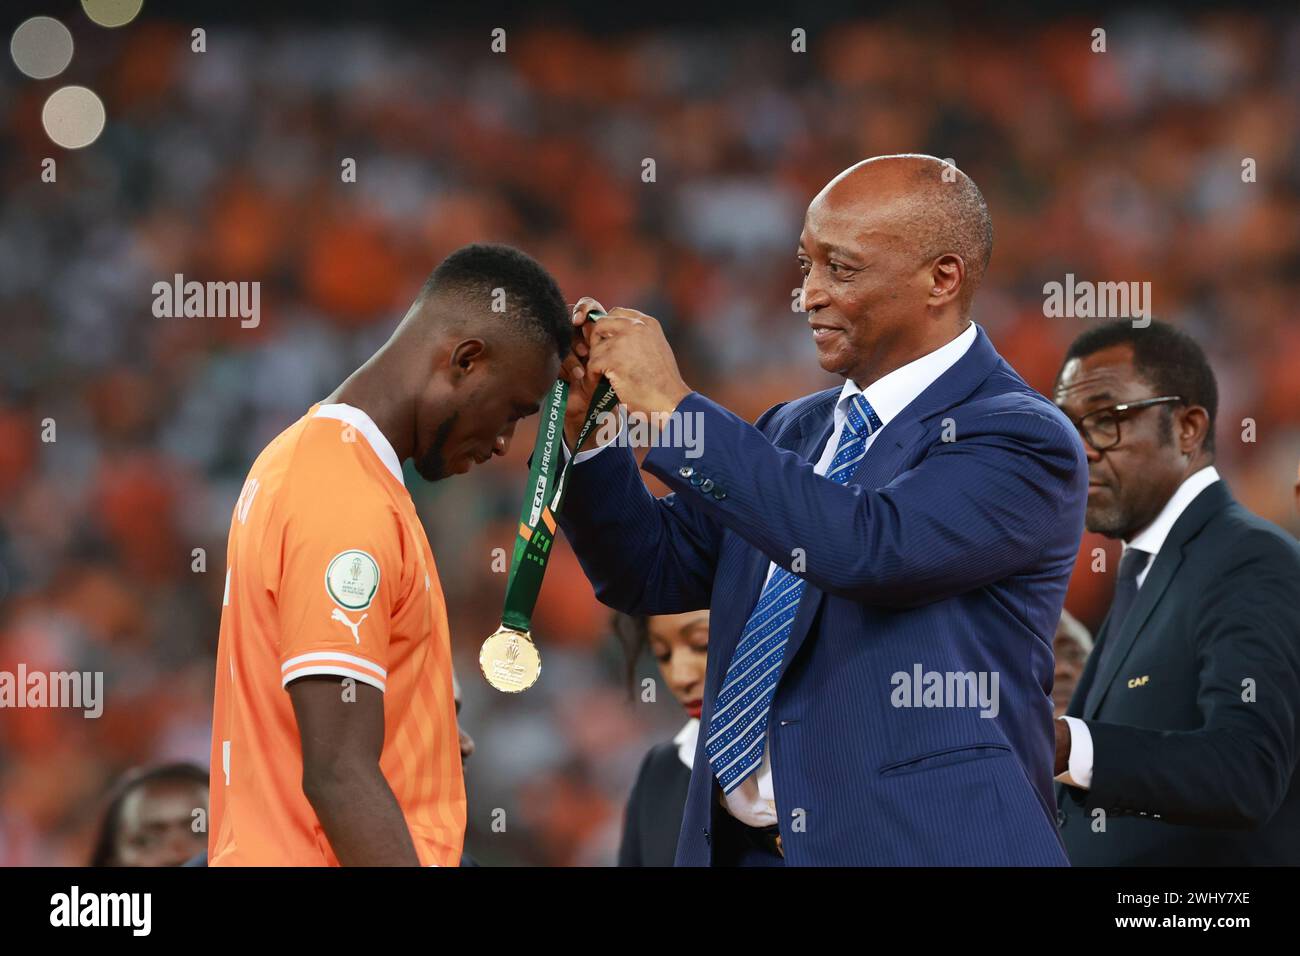 Abidjan, Cote d'Ivoire. 11th Feb, 2024. Patrice Motsepe (R), the president of the Confederation of African Football (CAF), awards players of team Cote d'Ivoire during the awarding ceremony after the final of the Africa Cup of Nations (AFCON) football match between Nigeria and Cote d'Ivoire in Abidjan, Cote d'Ivoire, on Feb. 11, 2024. Credit: Yvan Sonh/Xinhua/Alamy Live News Stock Photo